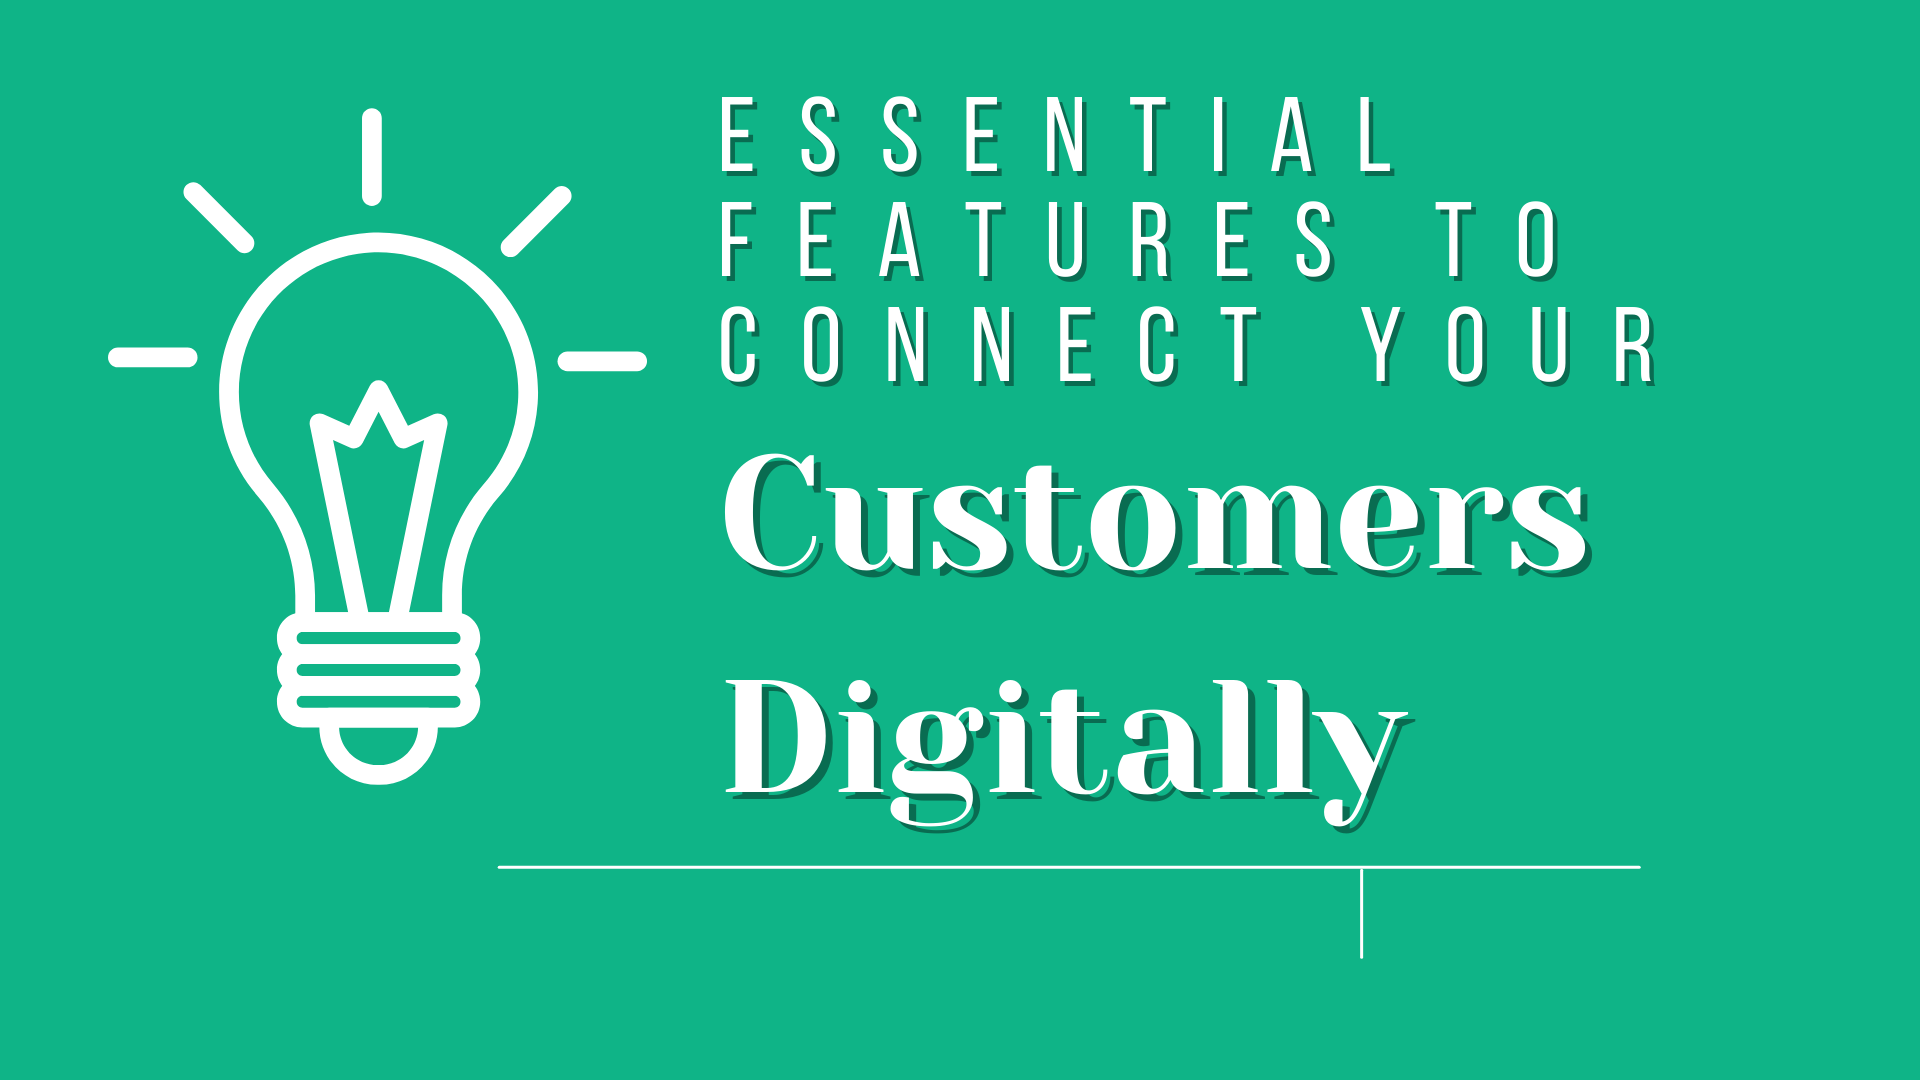 Essential Features To Connect Your Customers Digitally